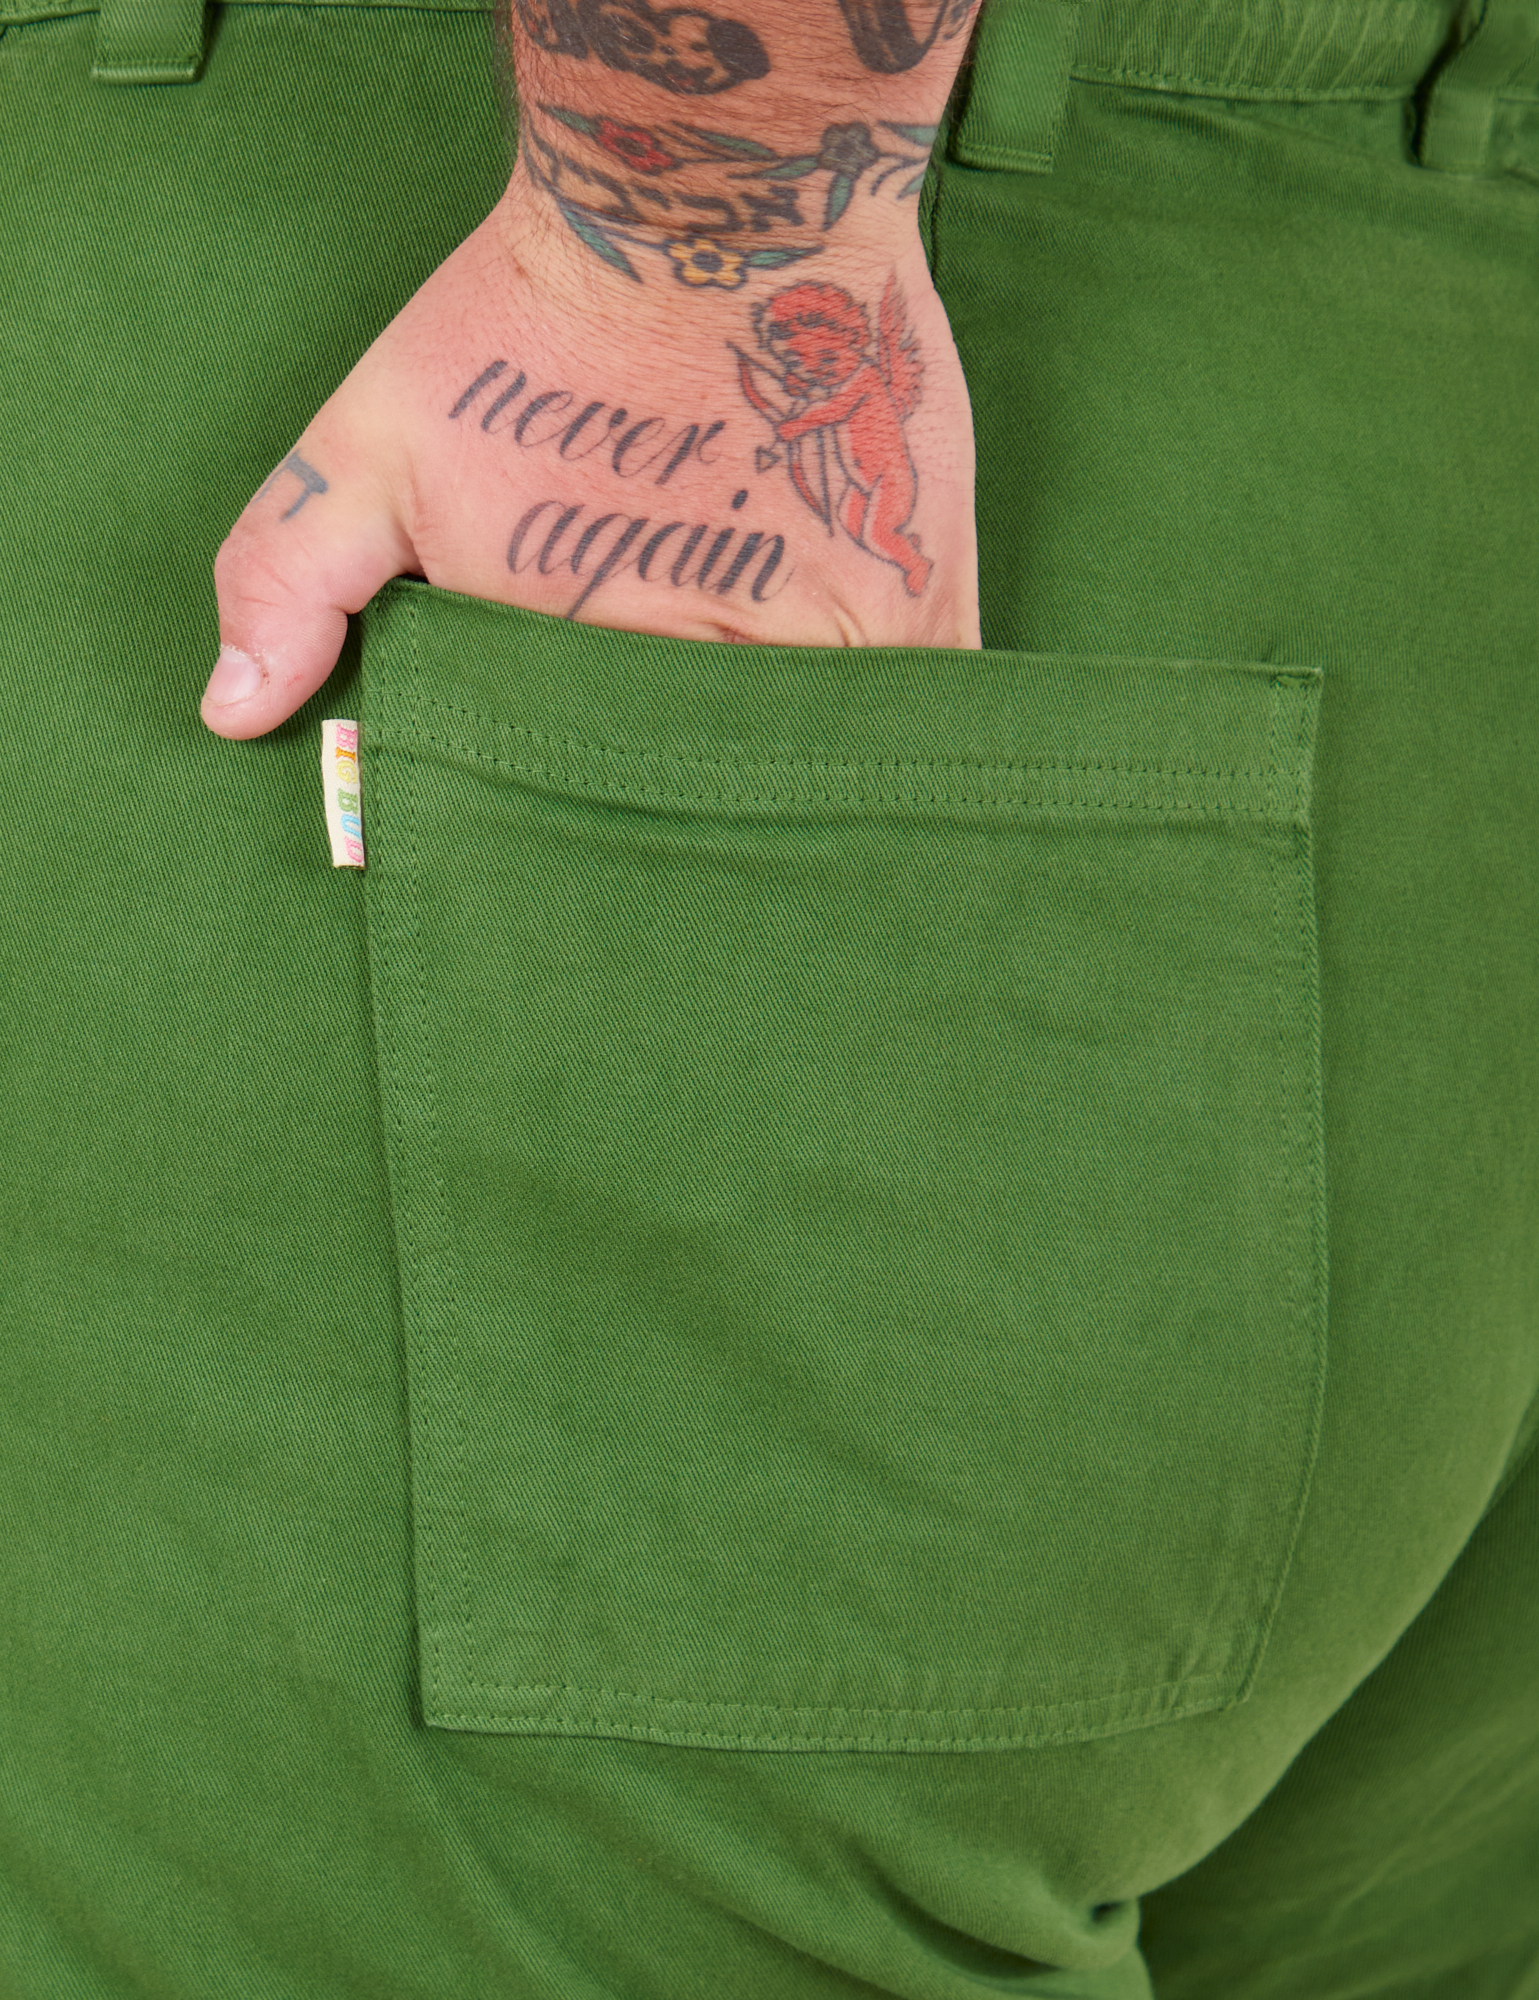 Bell Bottoms in Lawn Green back pocket close up. Sam has their hand in the pocket.